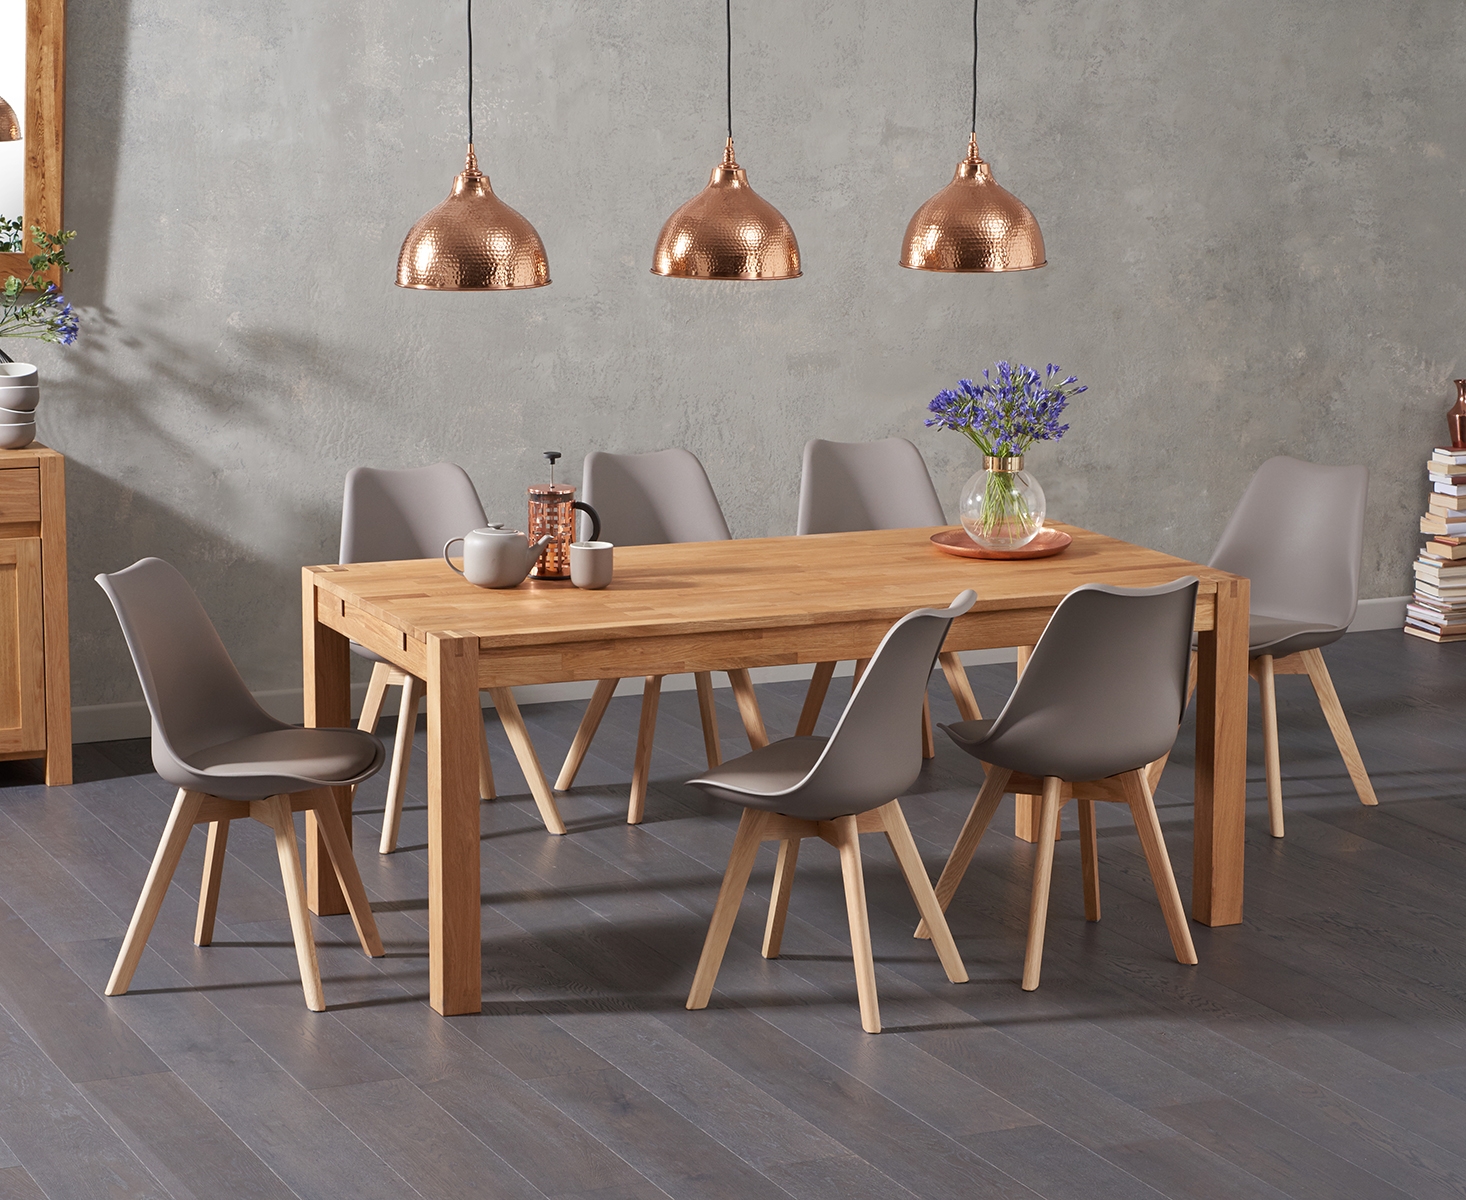 Verona 180cm Solid Oak Dining Table With 8 Mink Orson Faux Leather Chairs